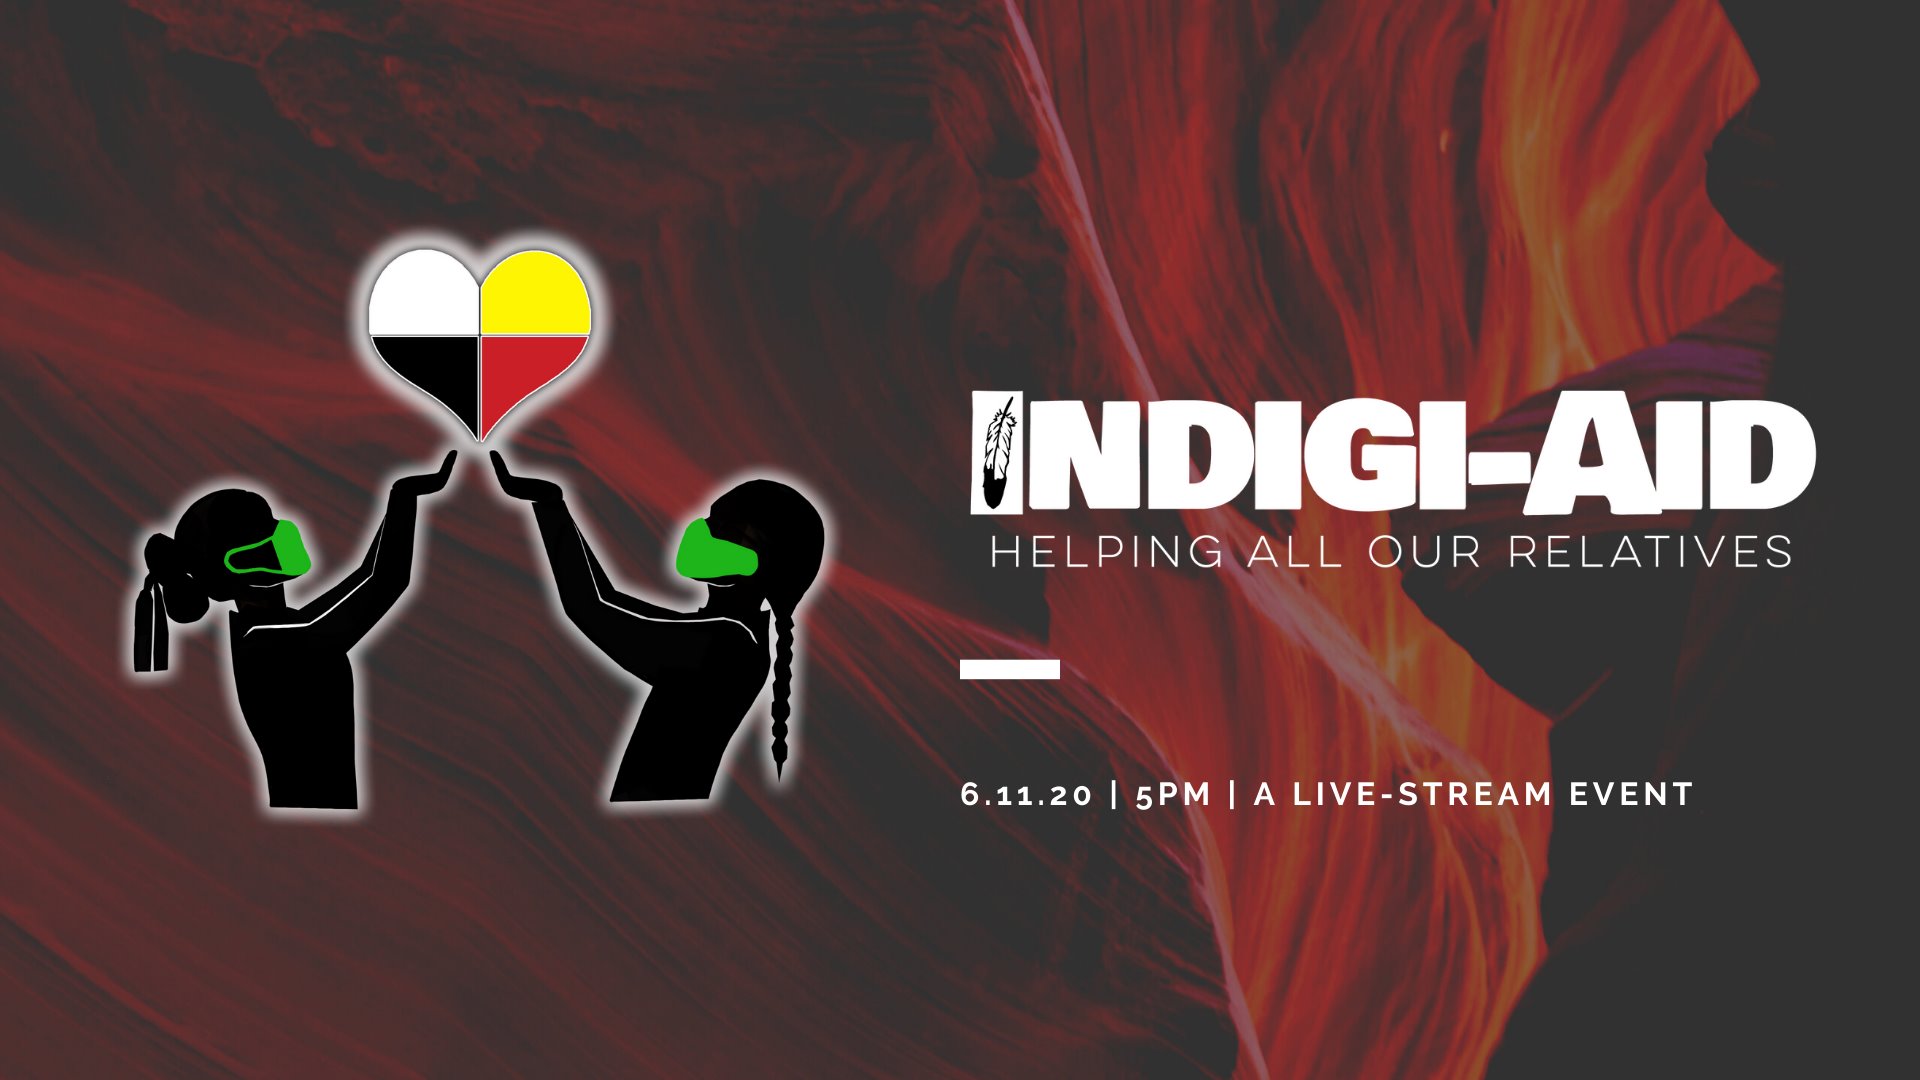 INDIGI-AID - Helping All Our Relatives @ online